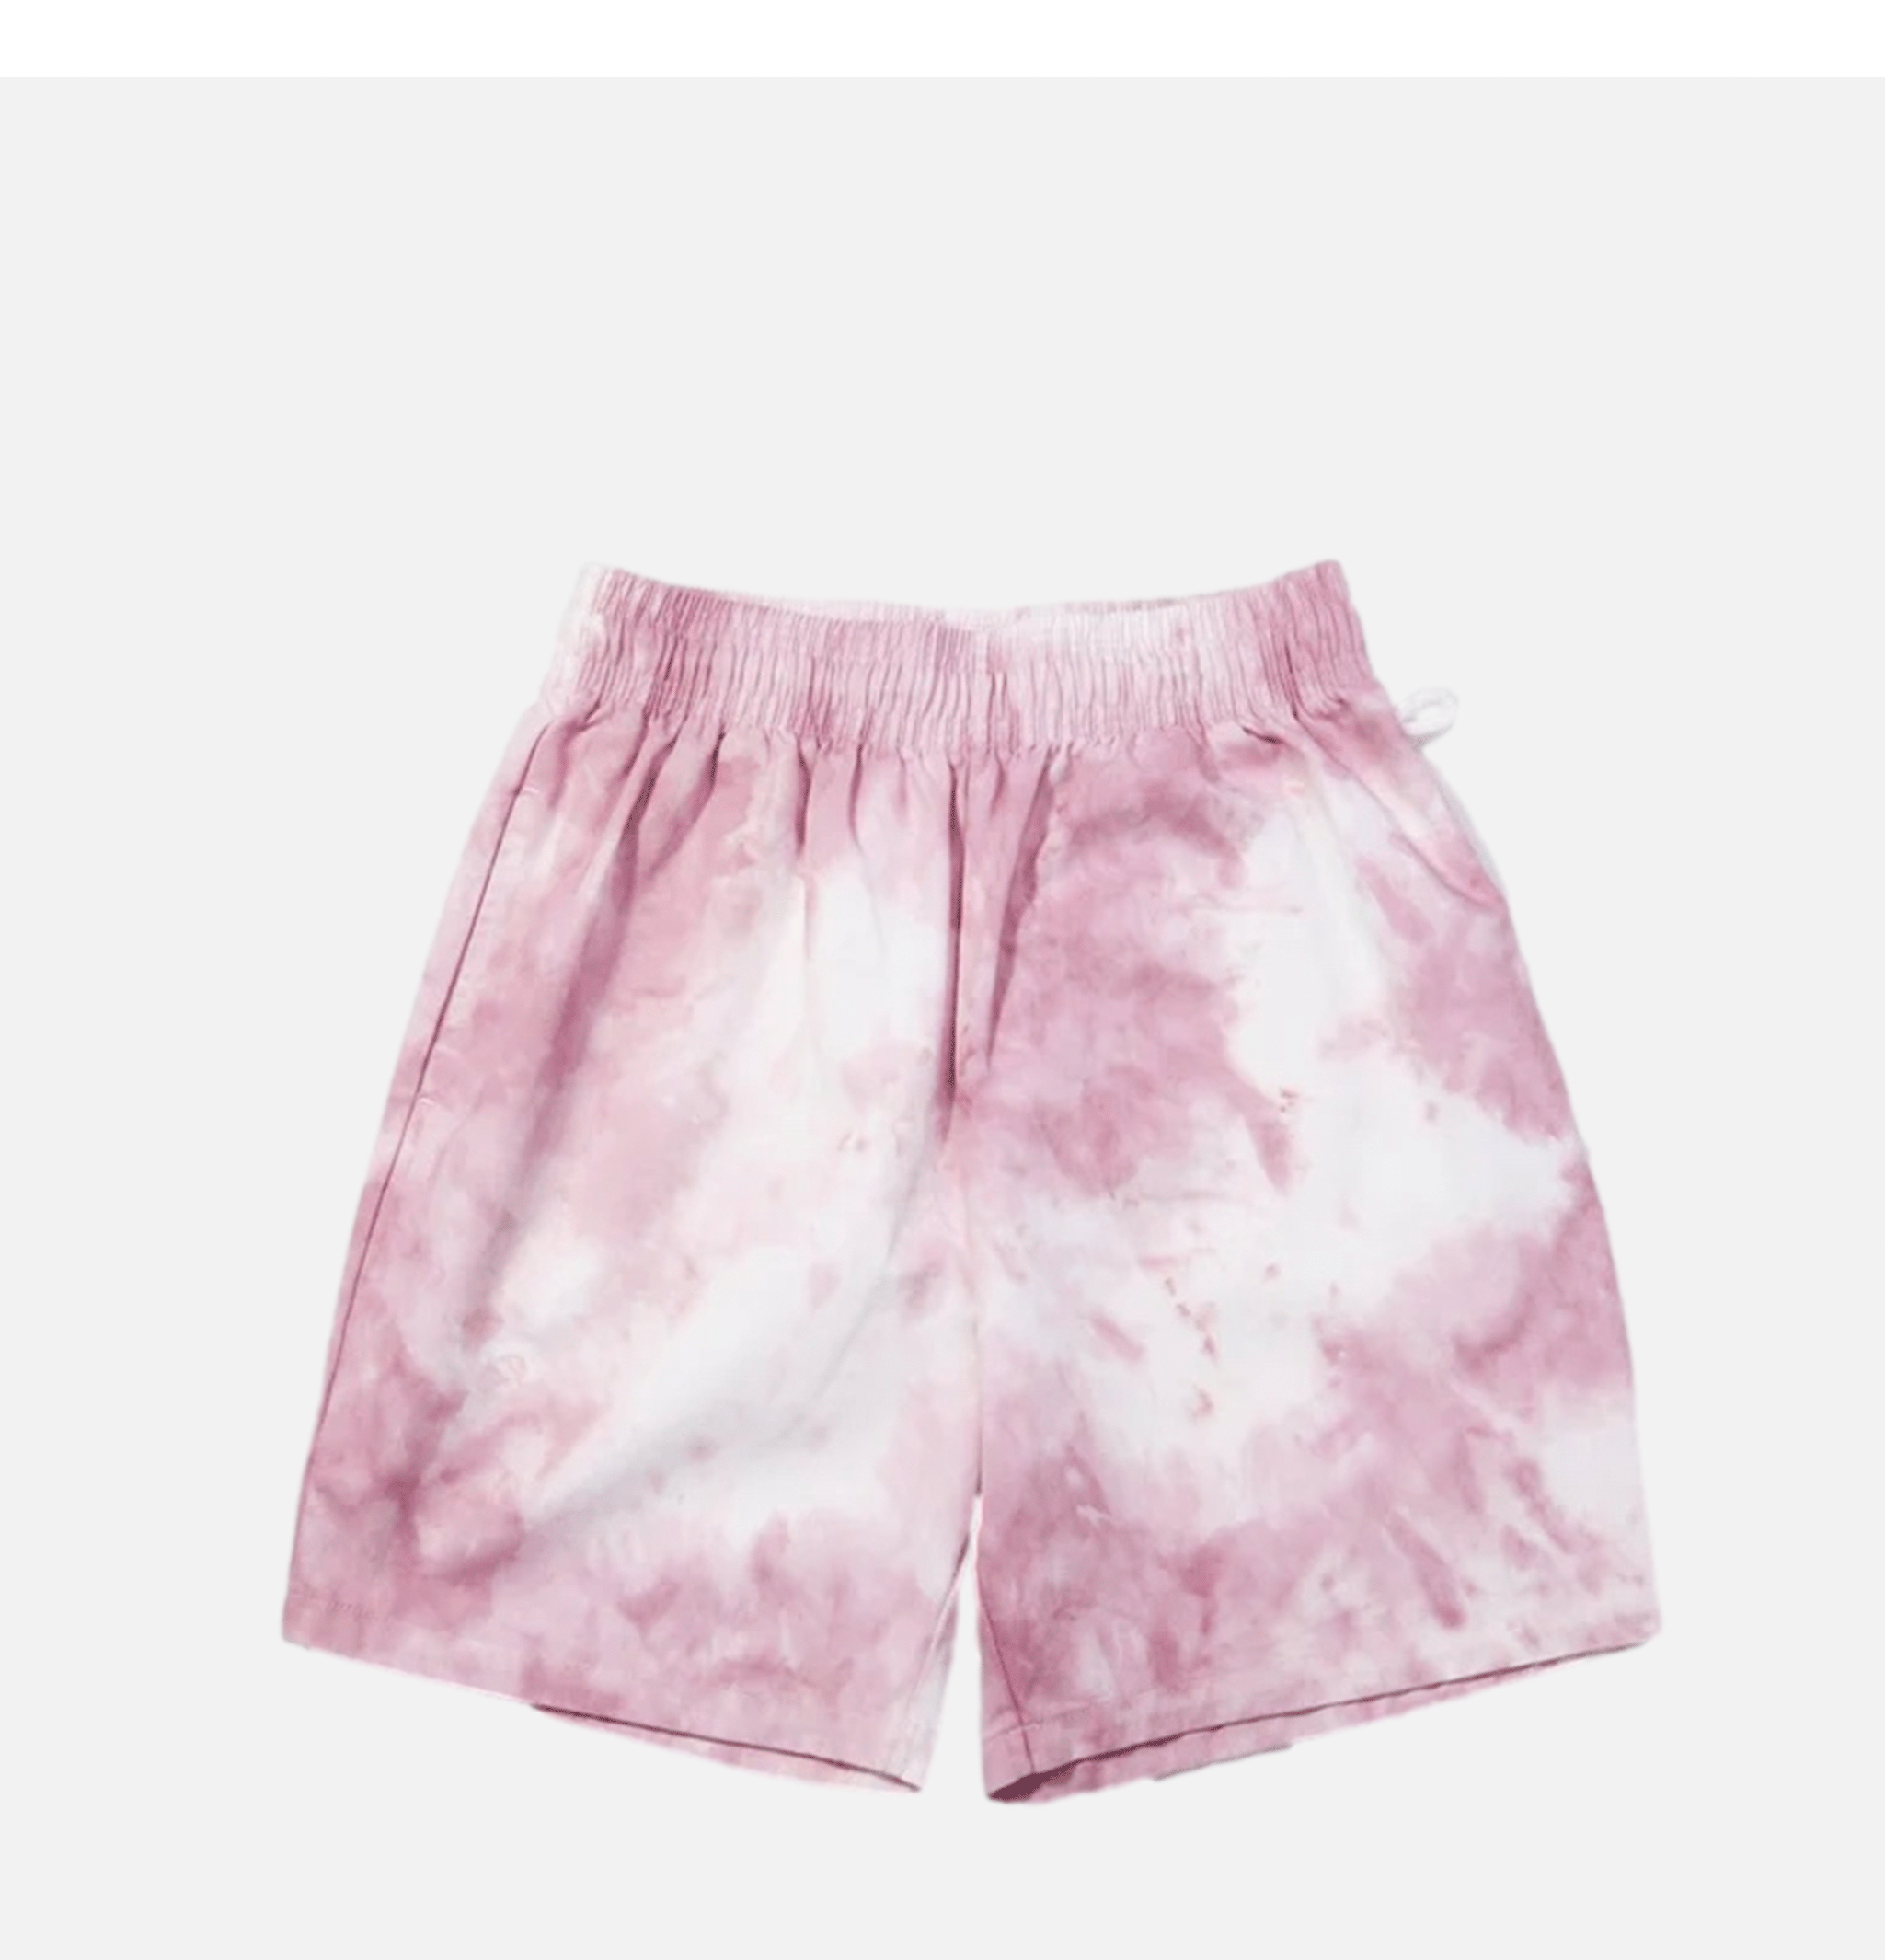 Cookman Chef Short Pants - Cabernet Stain Pink